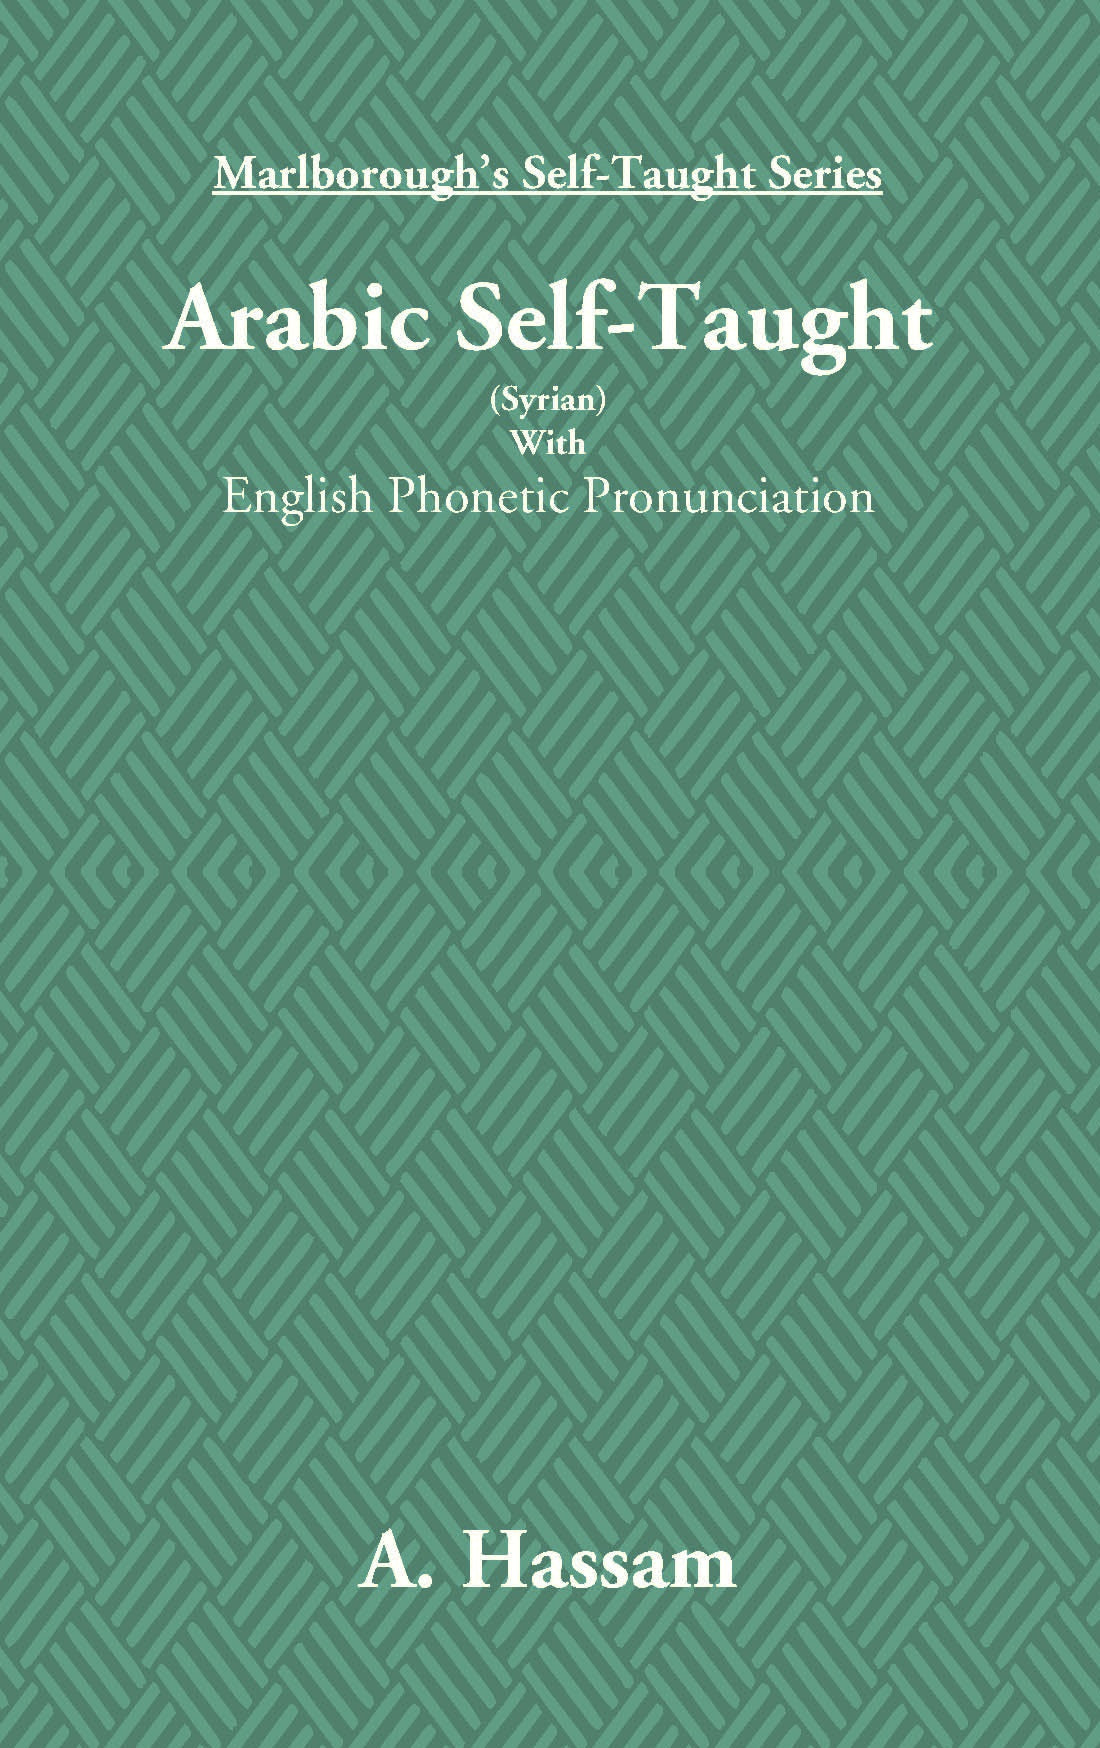 Arabic Self-Taught (Syrian): With English Phonetic Pronunciation